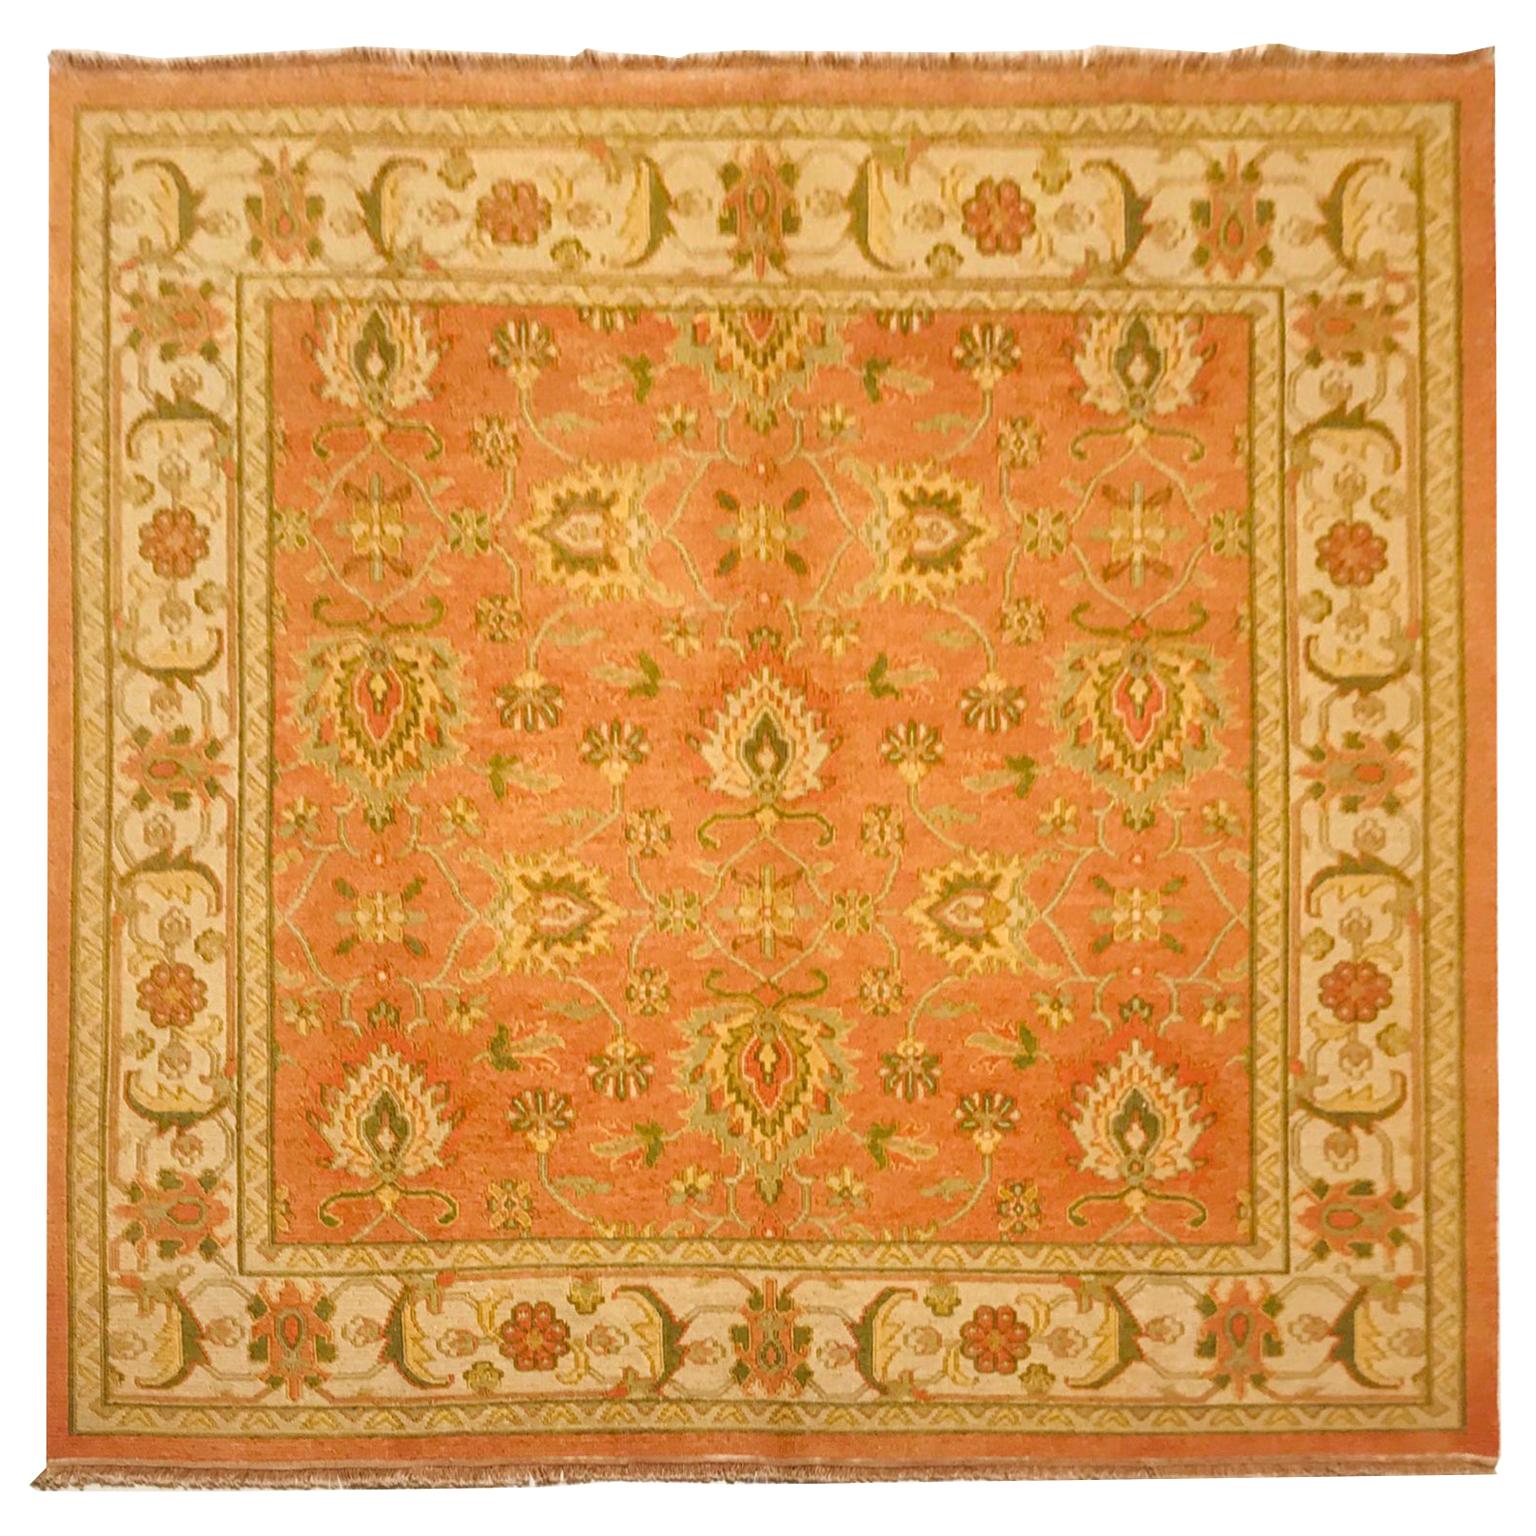 Late 20th Century Hand Knotted Indian Rug with Orange and Beige of 1980s For Sale